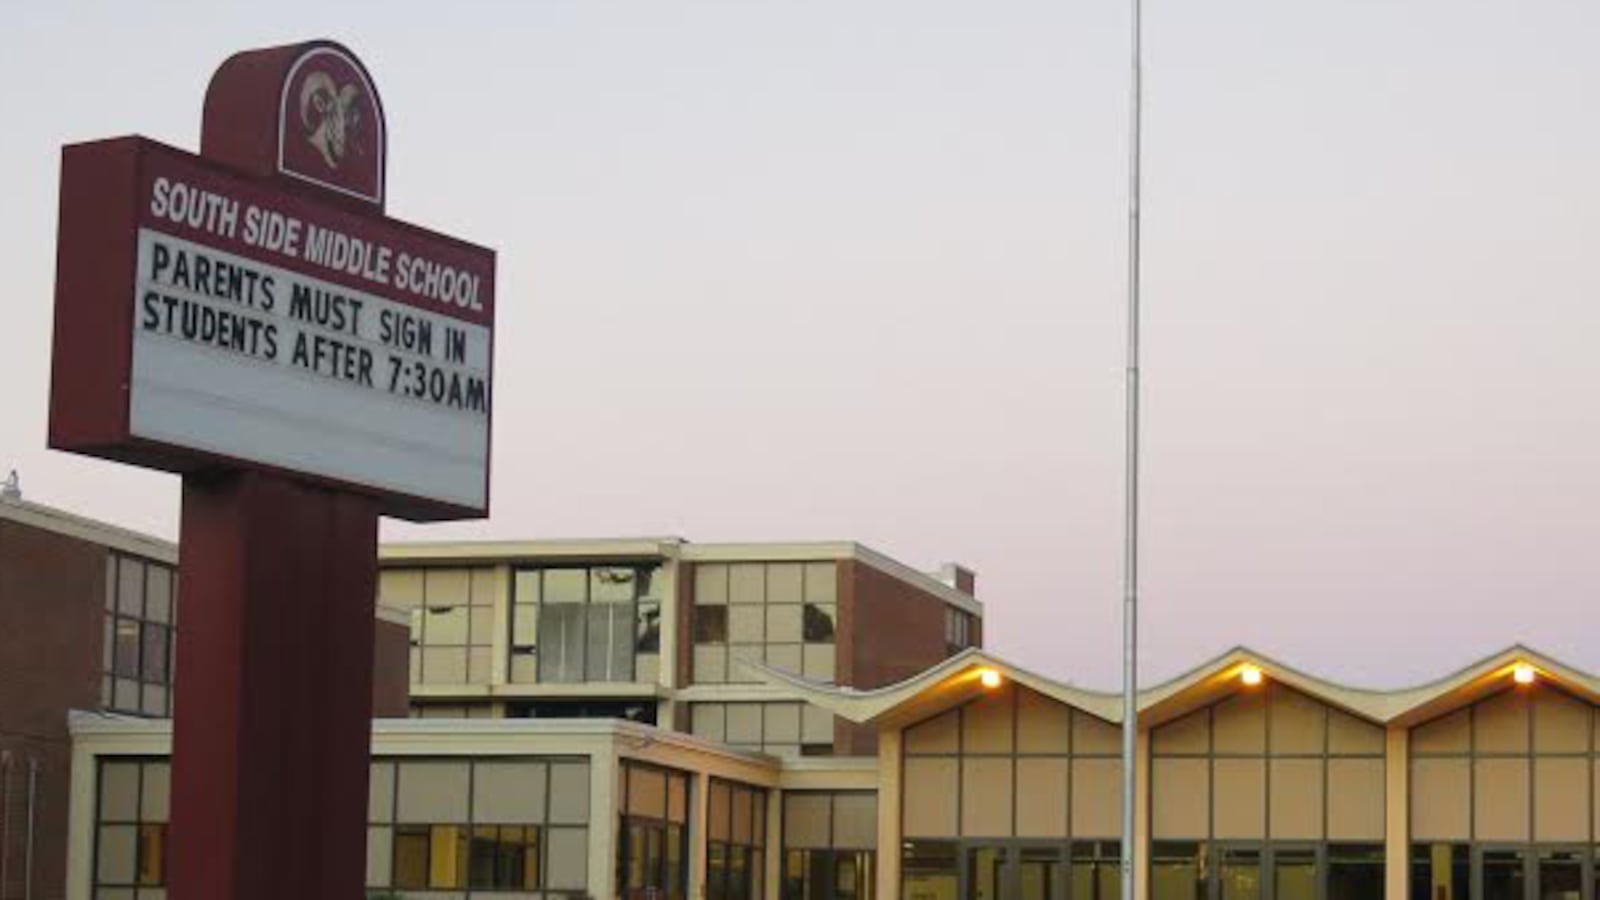 A state-run charter school was in the South Side Middle School building until last year. A national group withdrew its proposal to house unaccompanied migrant children there. File photo from 2016.